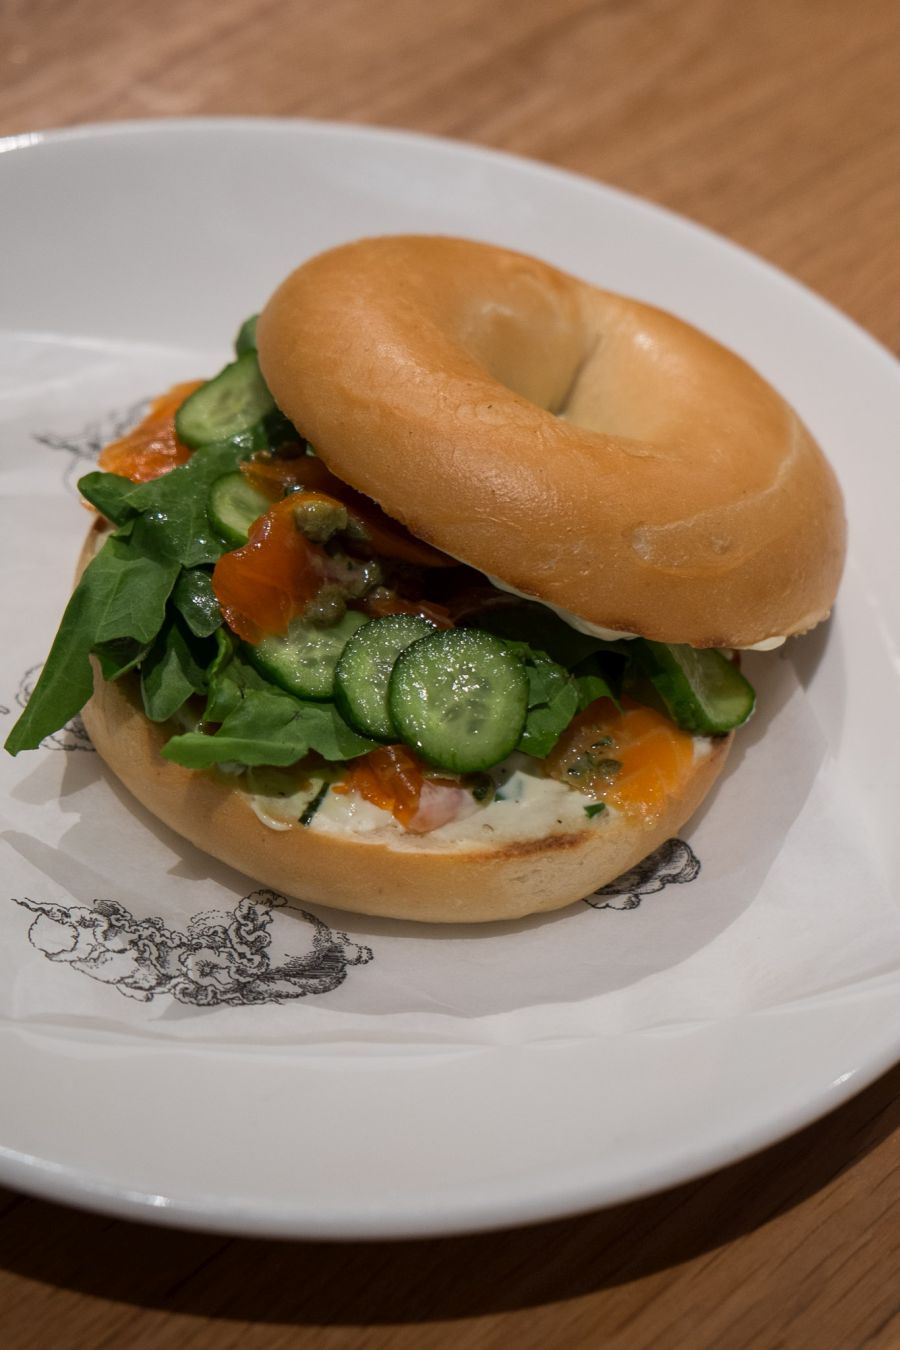 House smoked ocean trout bagel, sorrel, capers & cream cheese (AU$15)